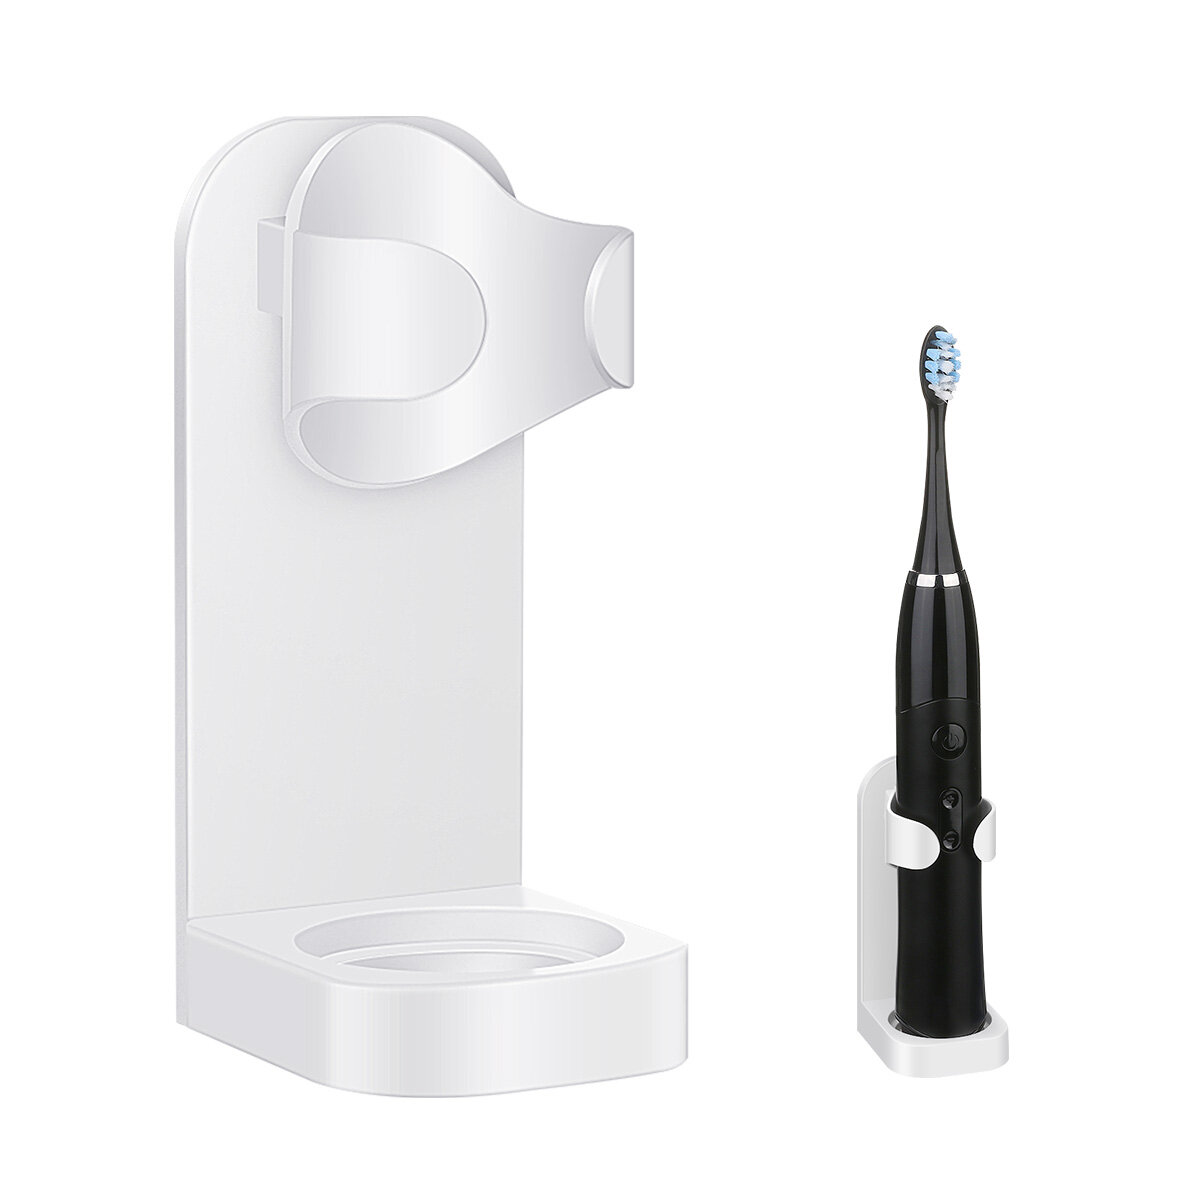 

Wall Mounted Electric Toothbrush Holder Bathroom Holder Bracket Plastic Products Toothpaste Storage Rack